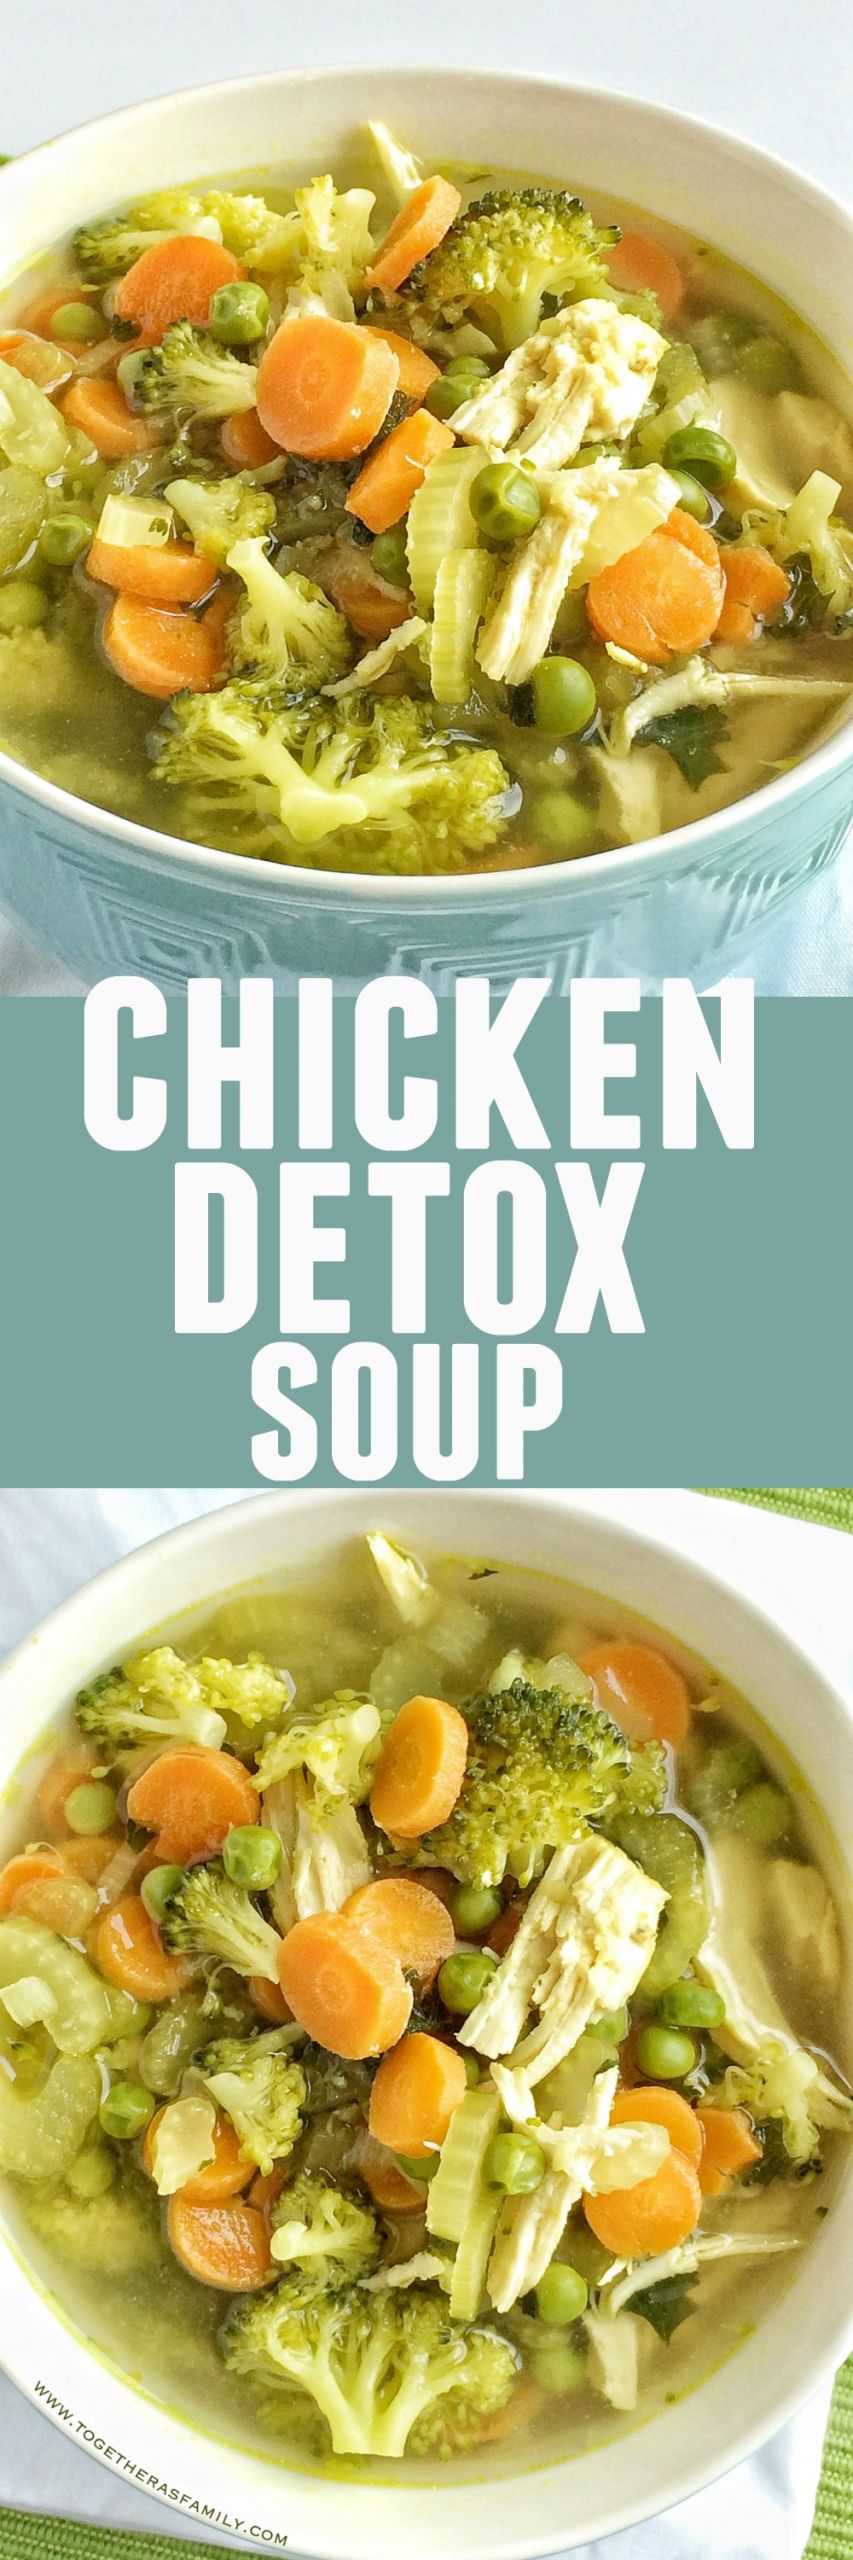 Low Cholesterol Recipes With Chicken
 Chicken Detox Soup To her as Family